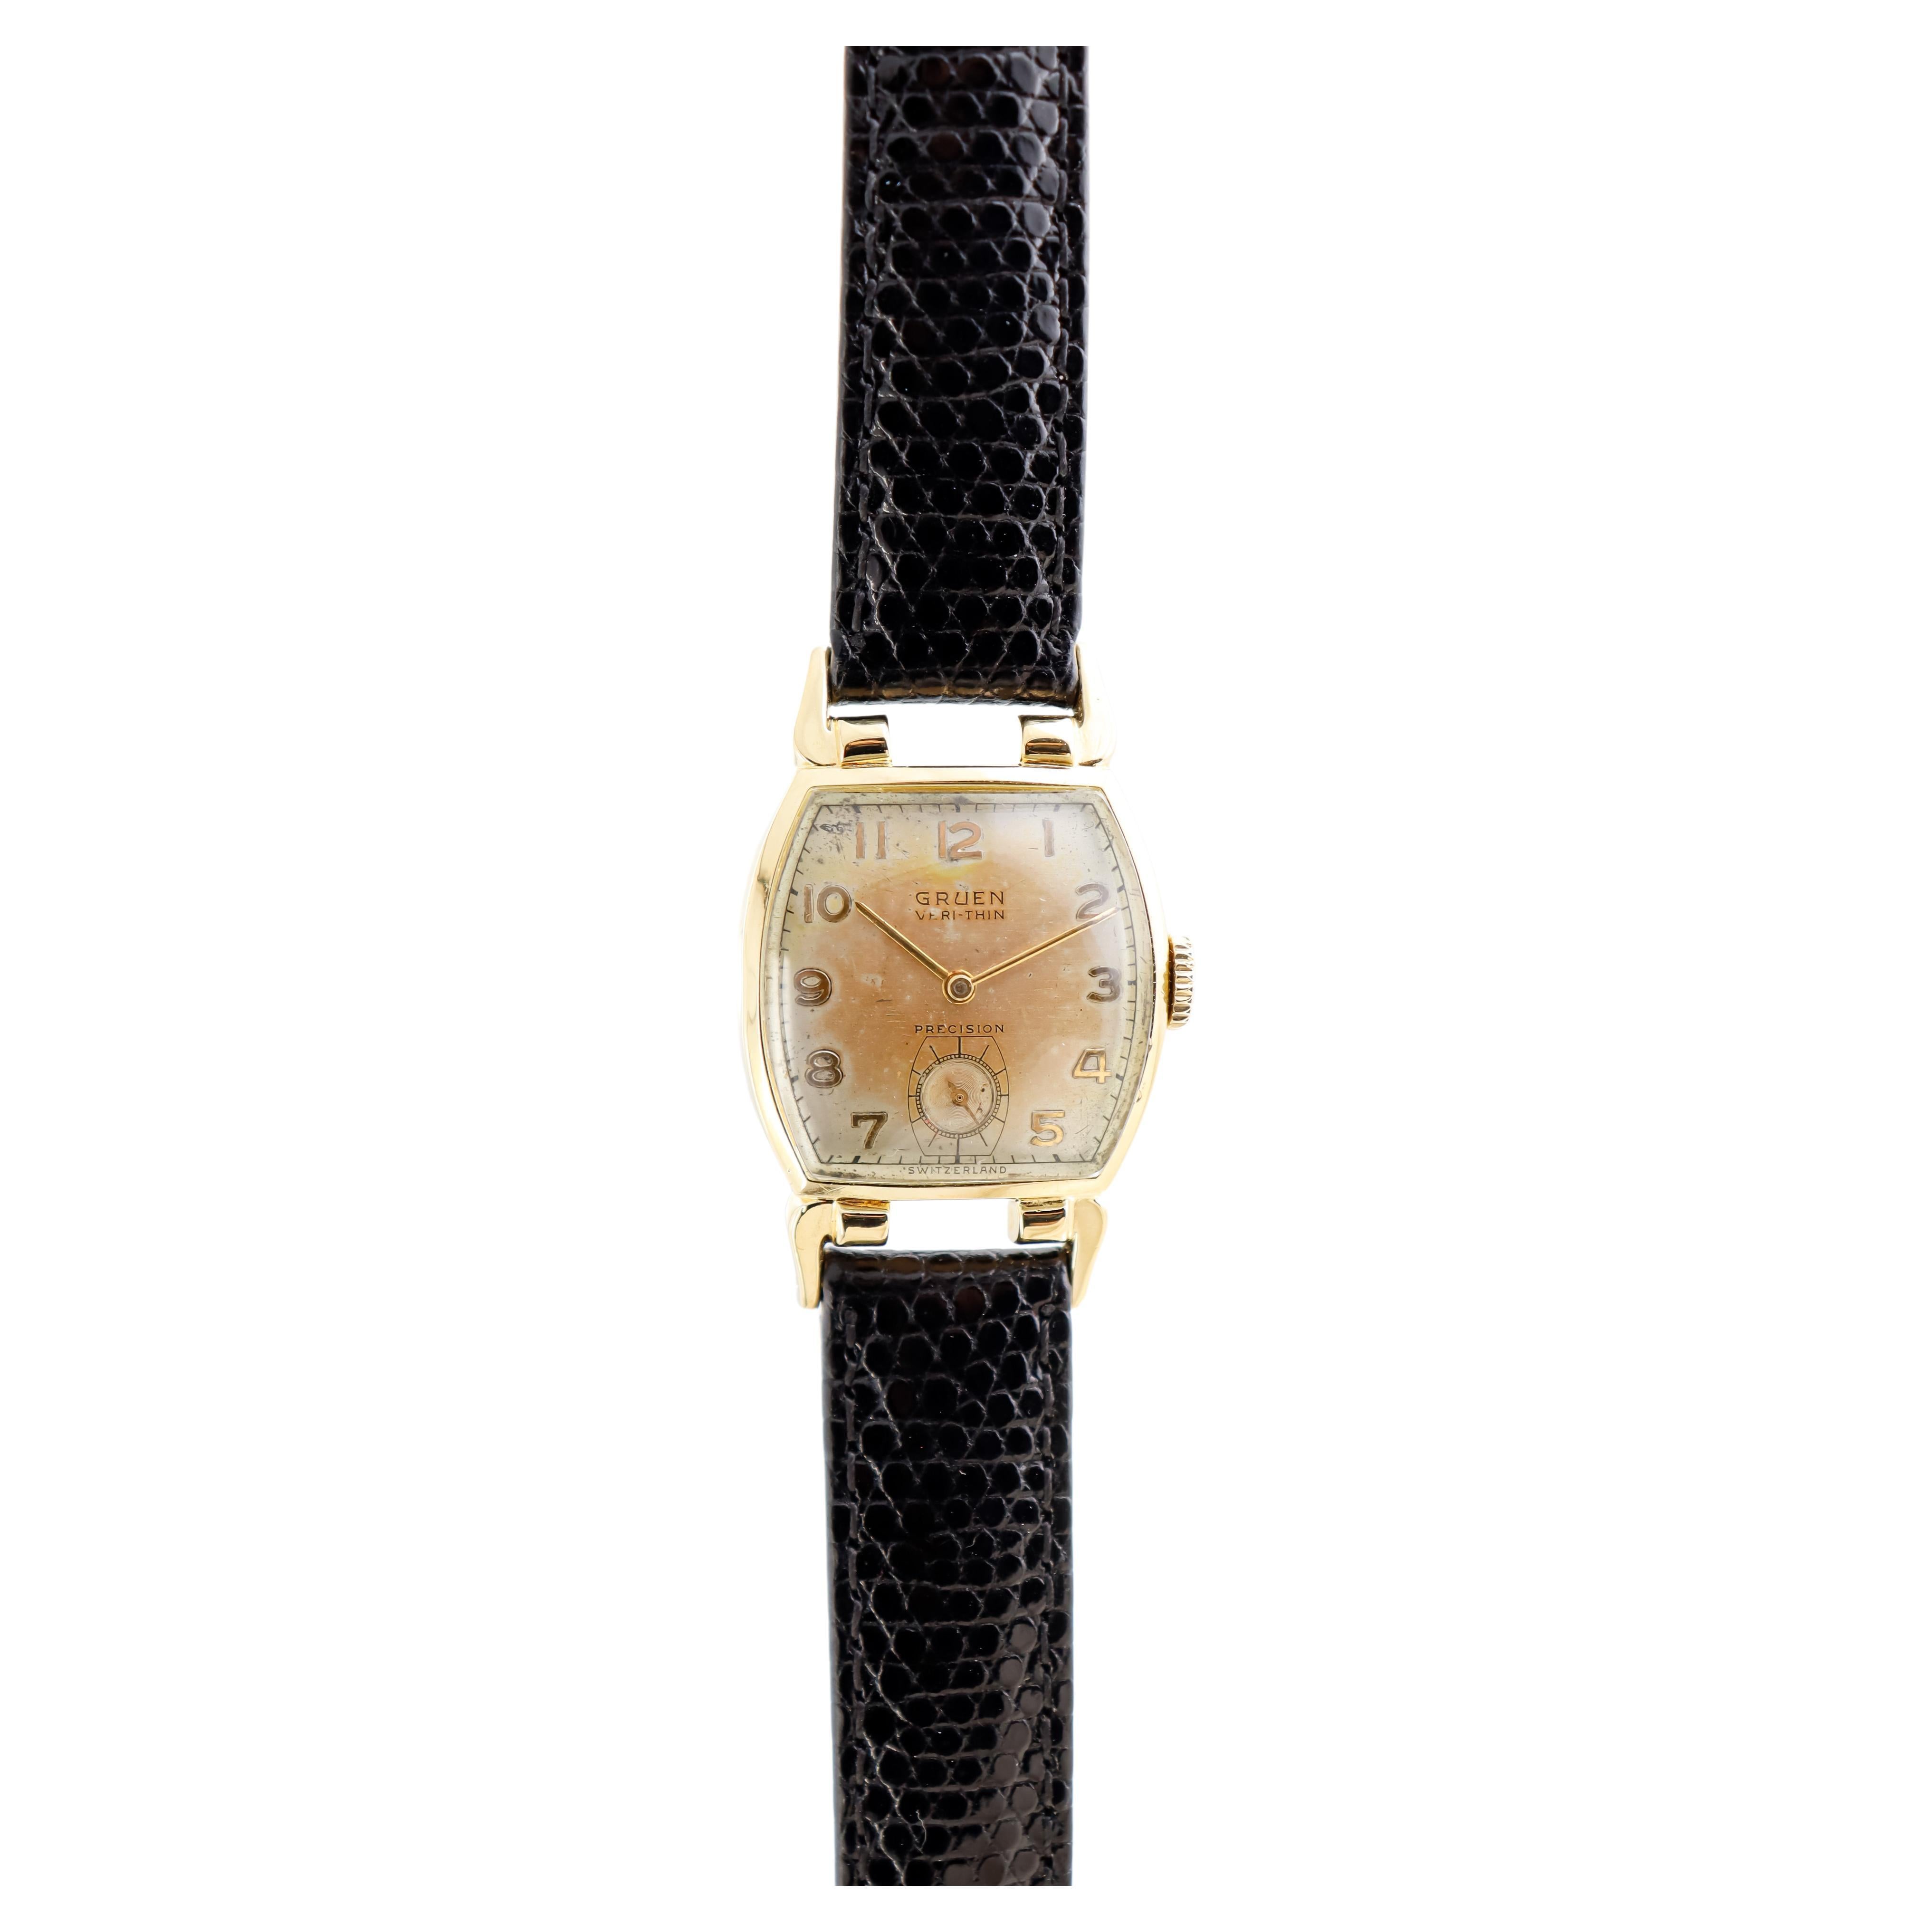 Gruen Yellow Gold Filled Art Deco Watch with Original Patinated Dial from 1947 4